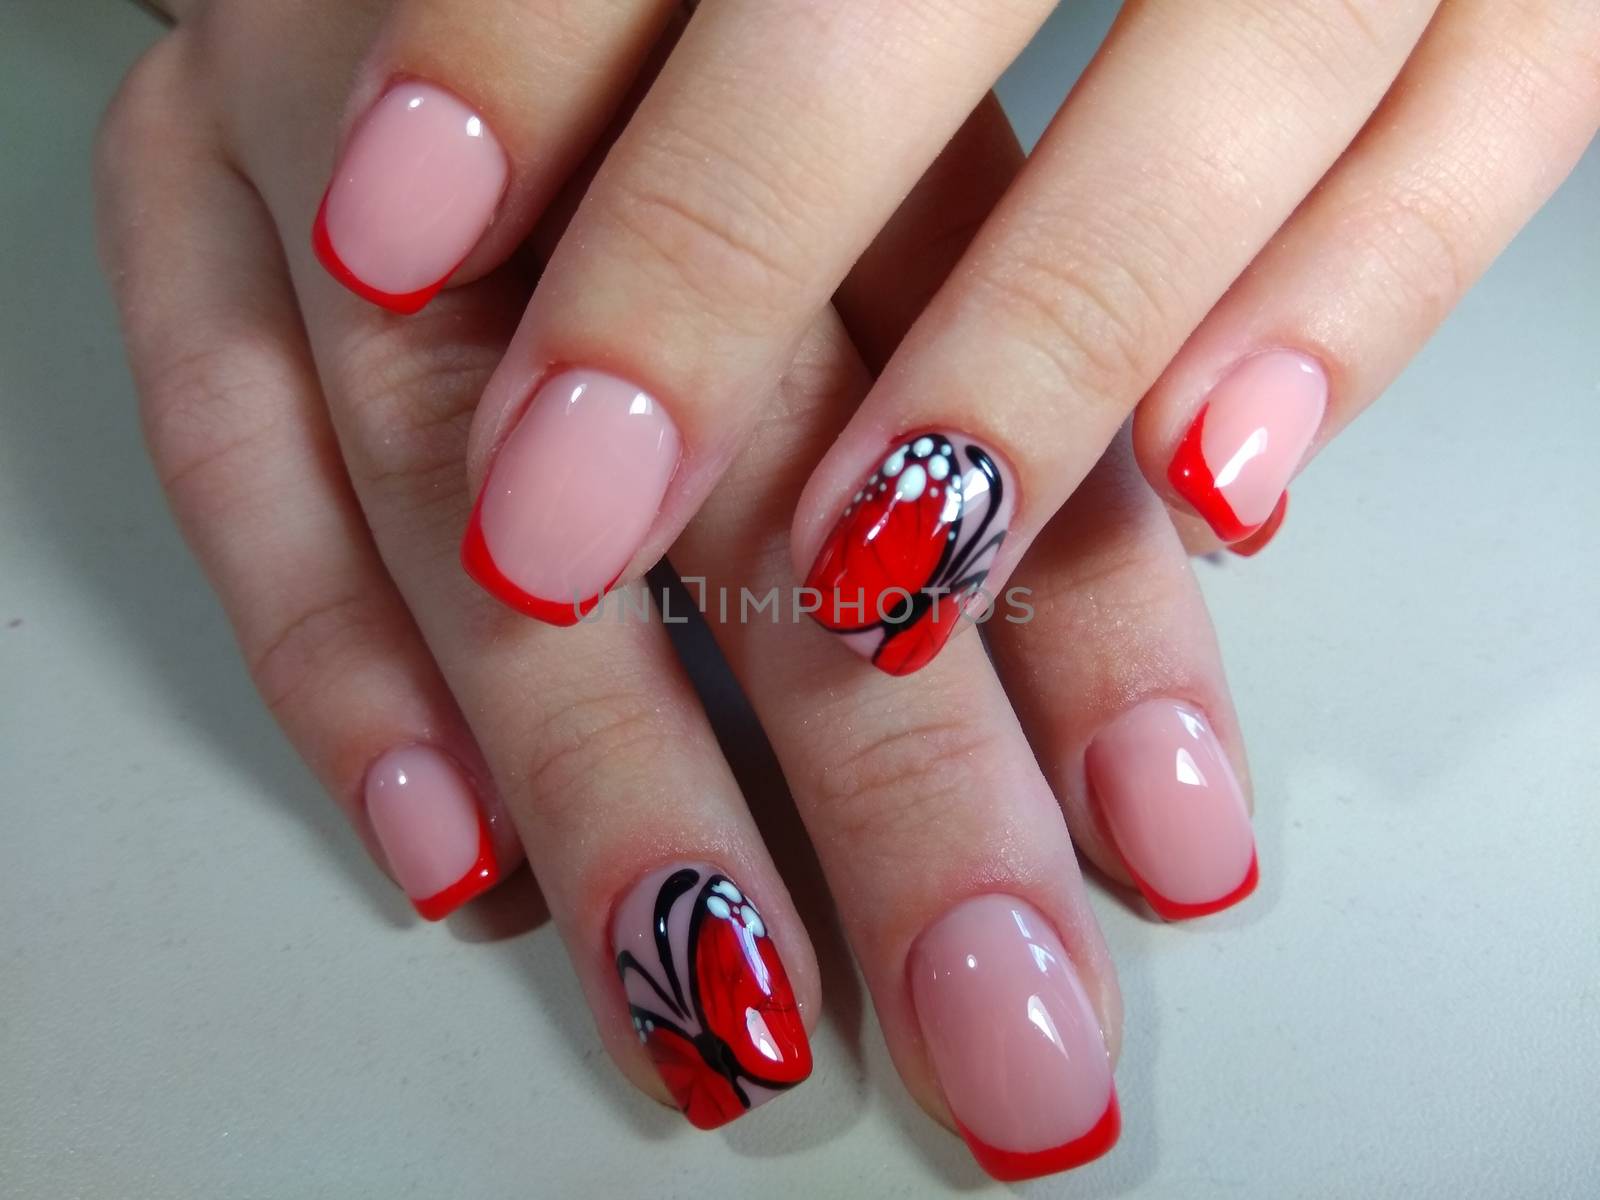 Here is presented one of the best manicure designs this year's Nail red butterfly